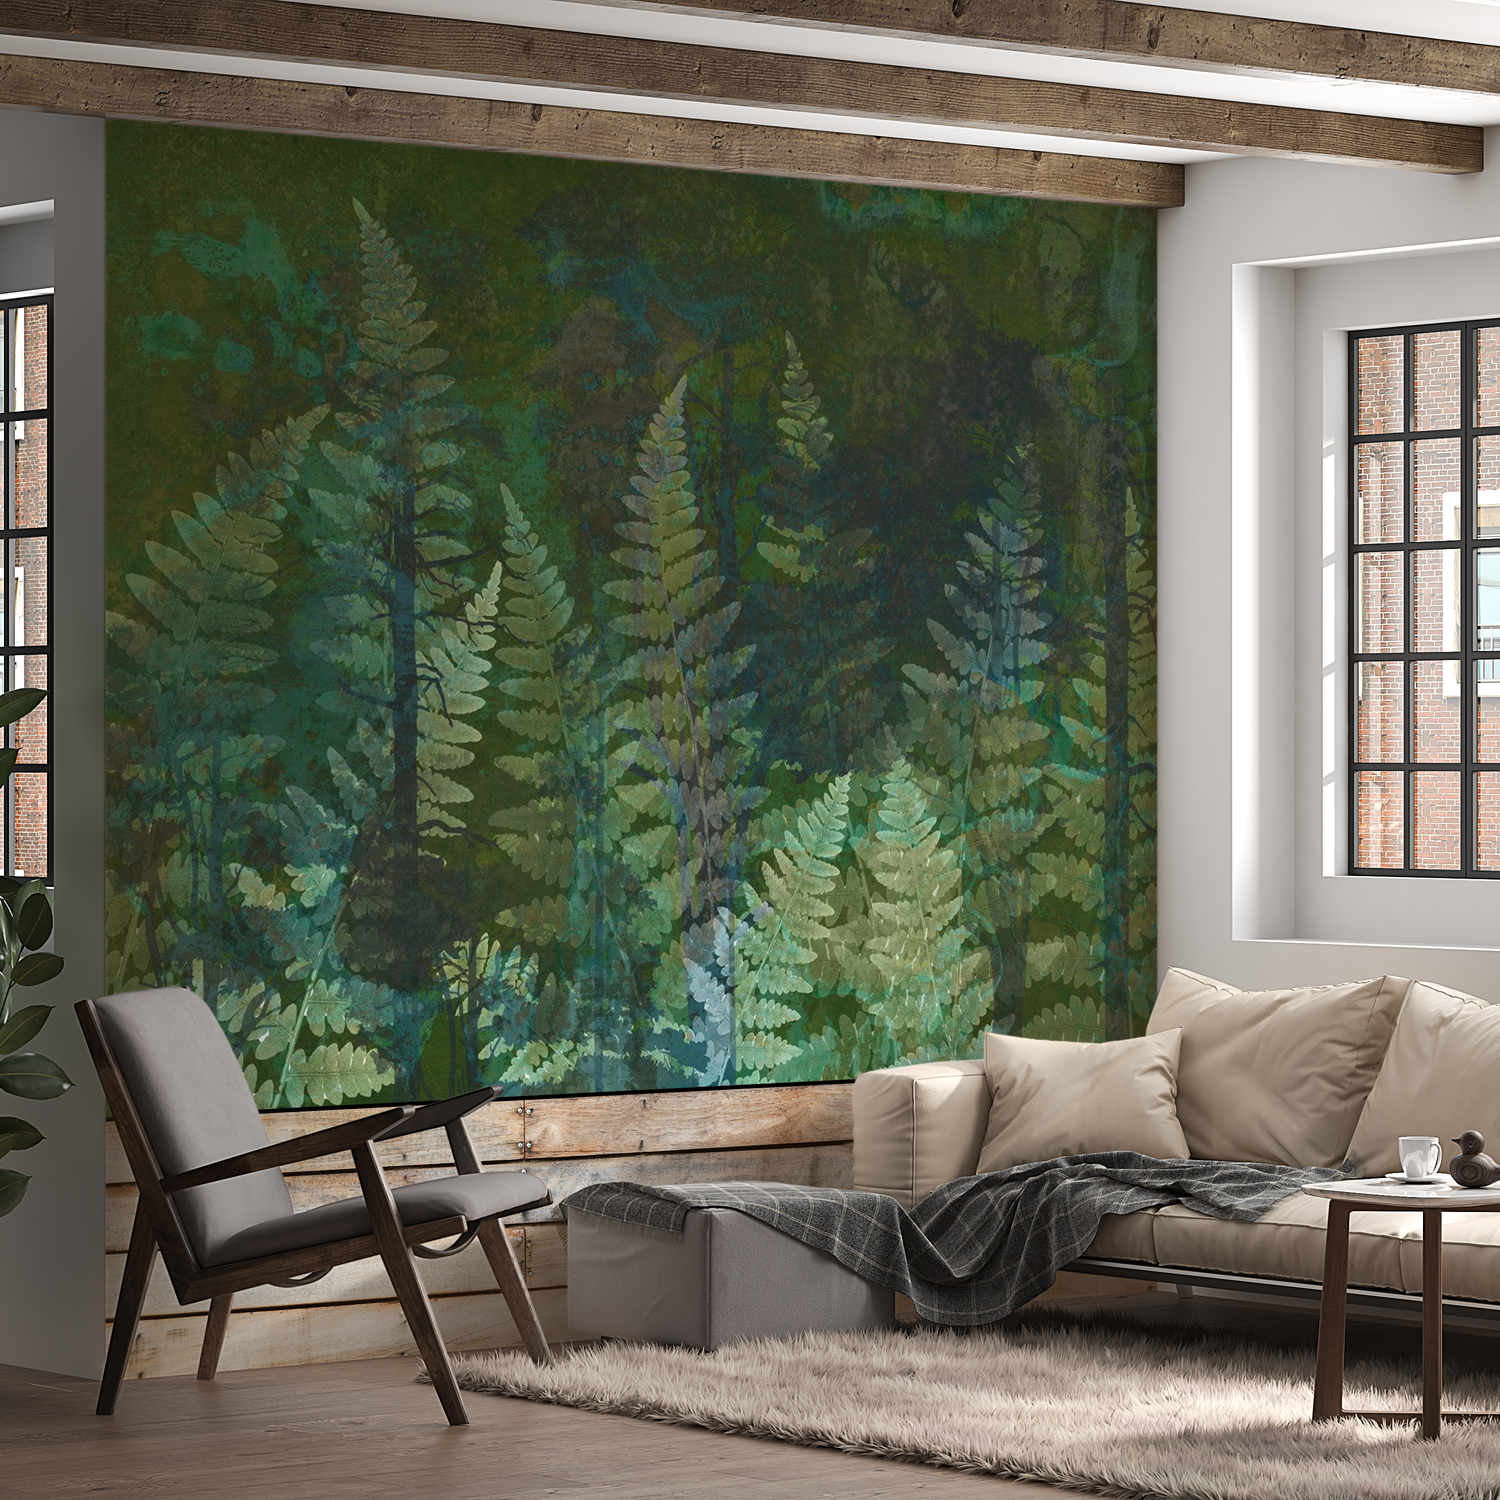 Peel & Stick Botanical Wall Mural - Green Abstract Ferns - Removable Wallpaper 38"Wx27"H